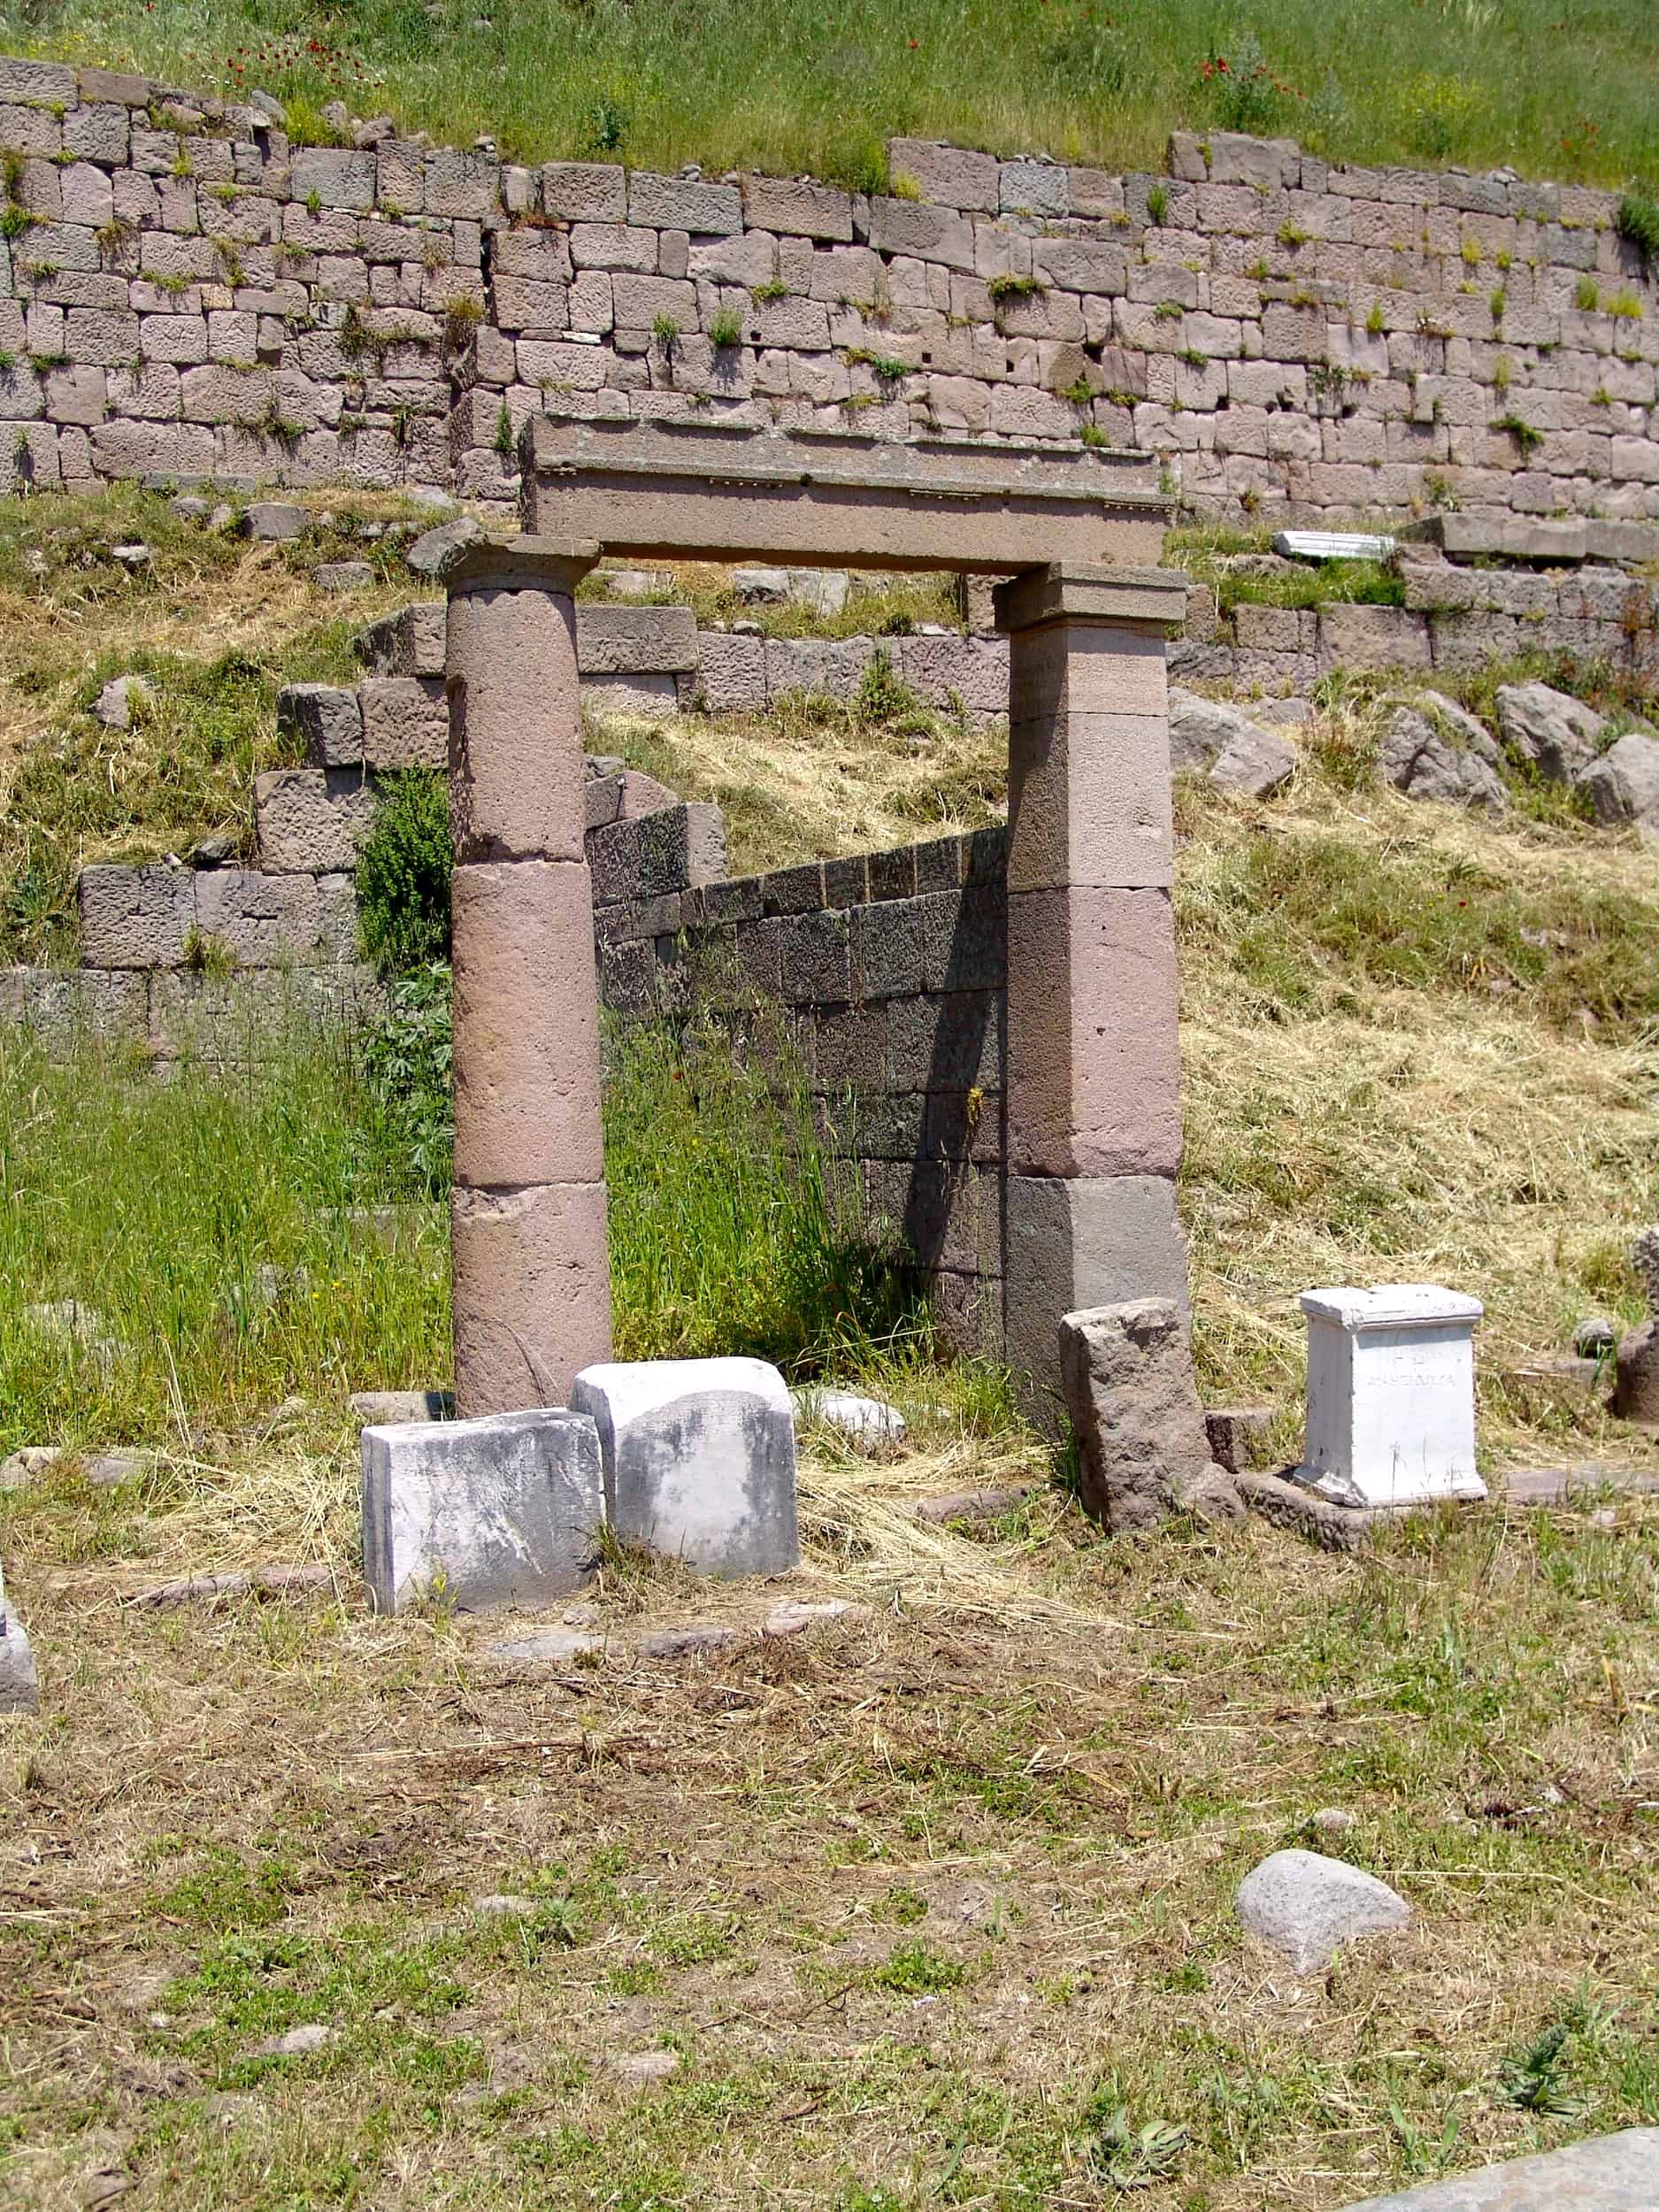 Two re-erected columns of the north stoa of the Sanctuary of Demeter